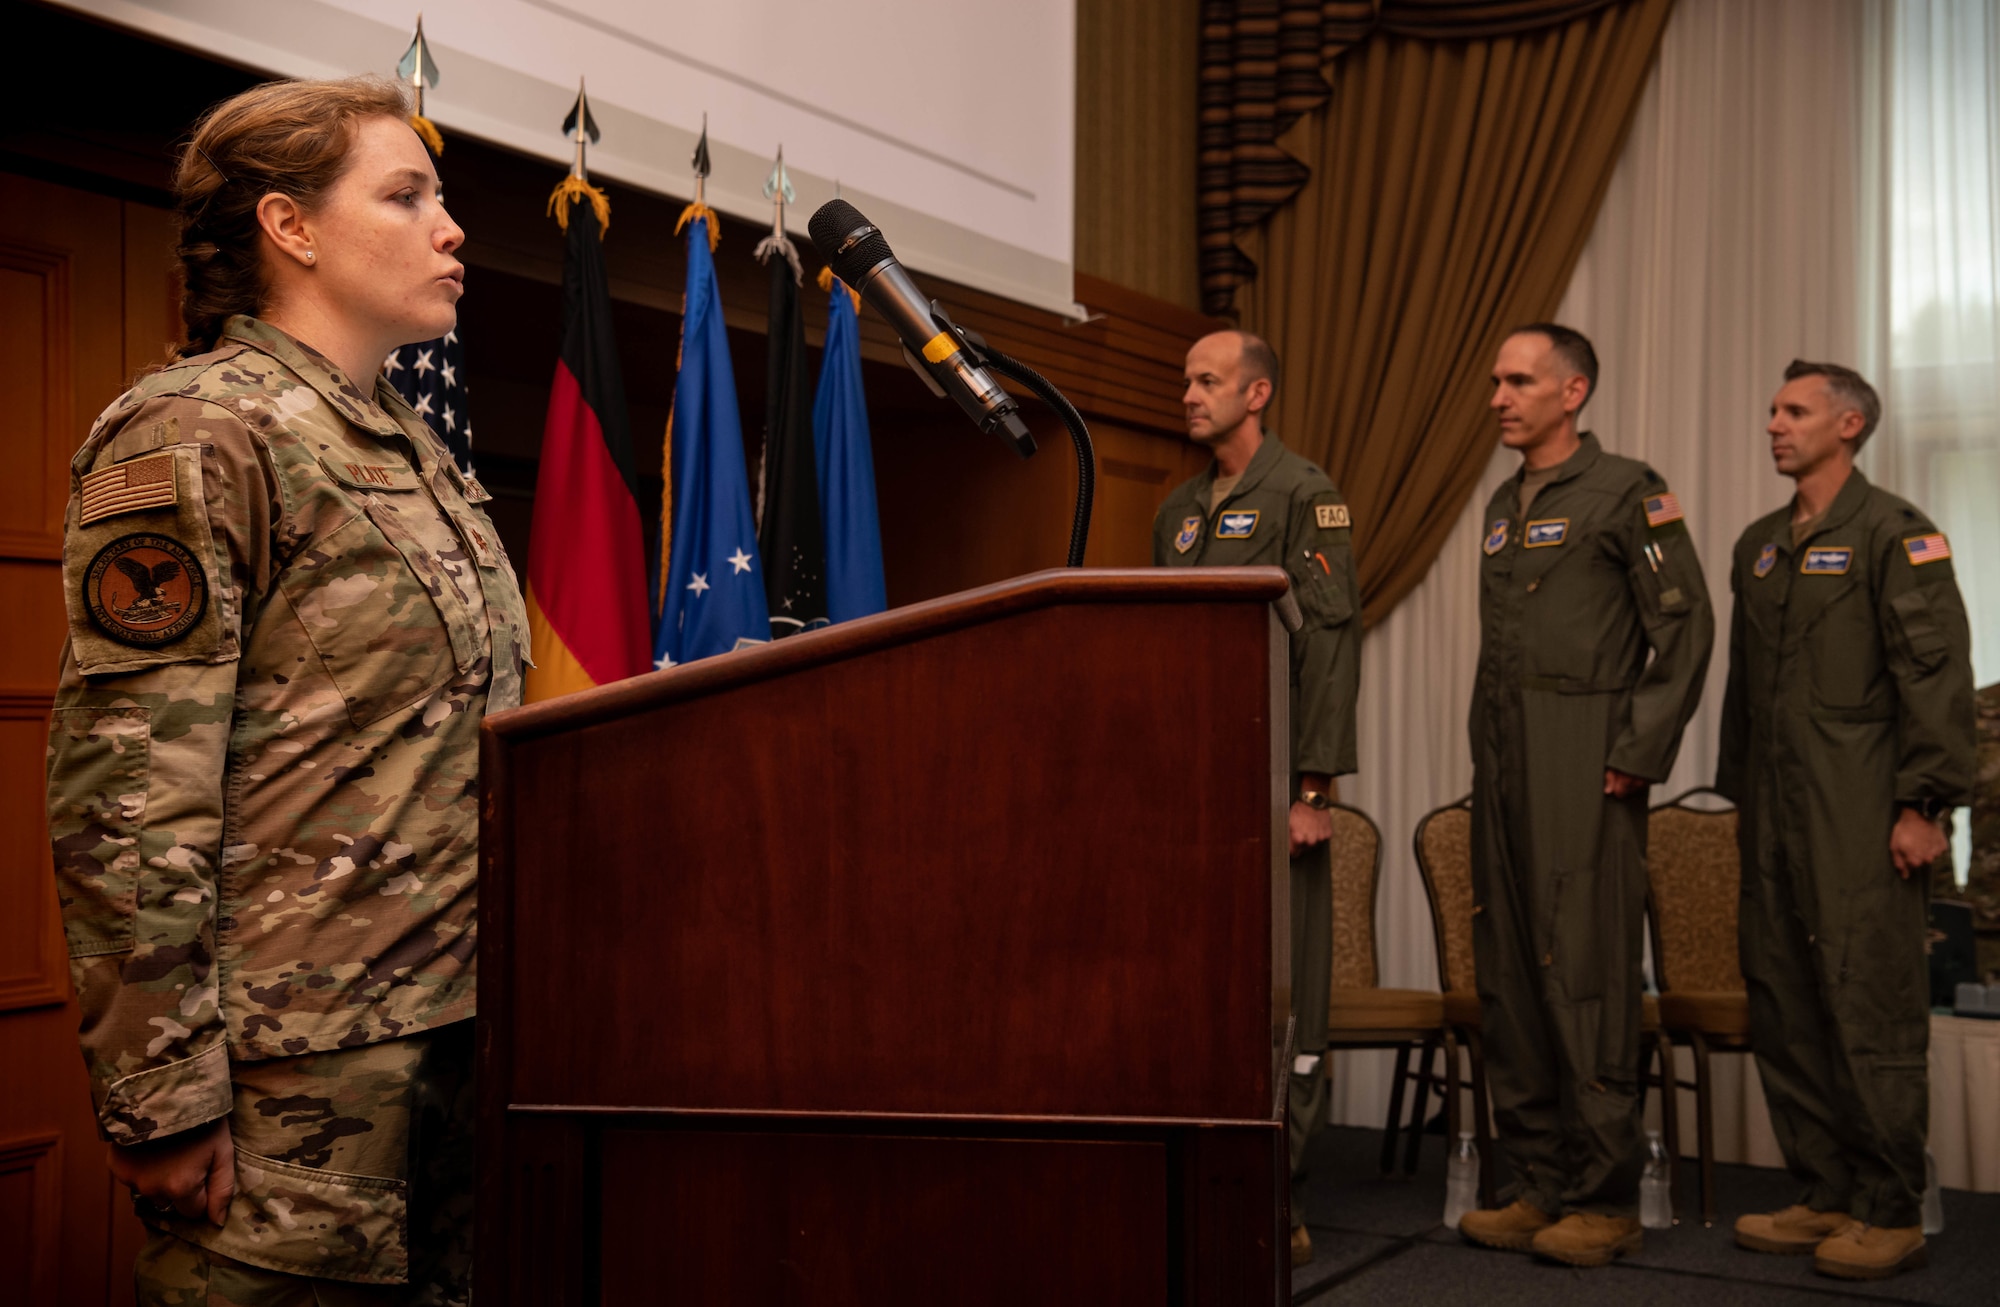 U.S. Air Force Maj. Erin Plate, Military Personnel Exchange Program exchange officer, sings the national anthem during a Military Personnel Exchange Program change of command ceremony.